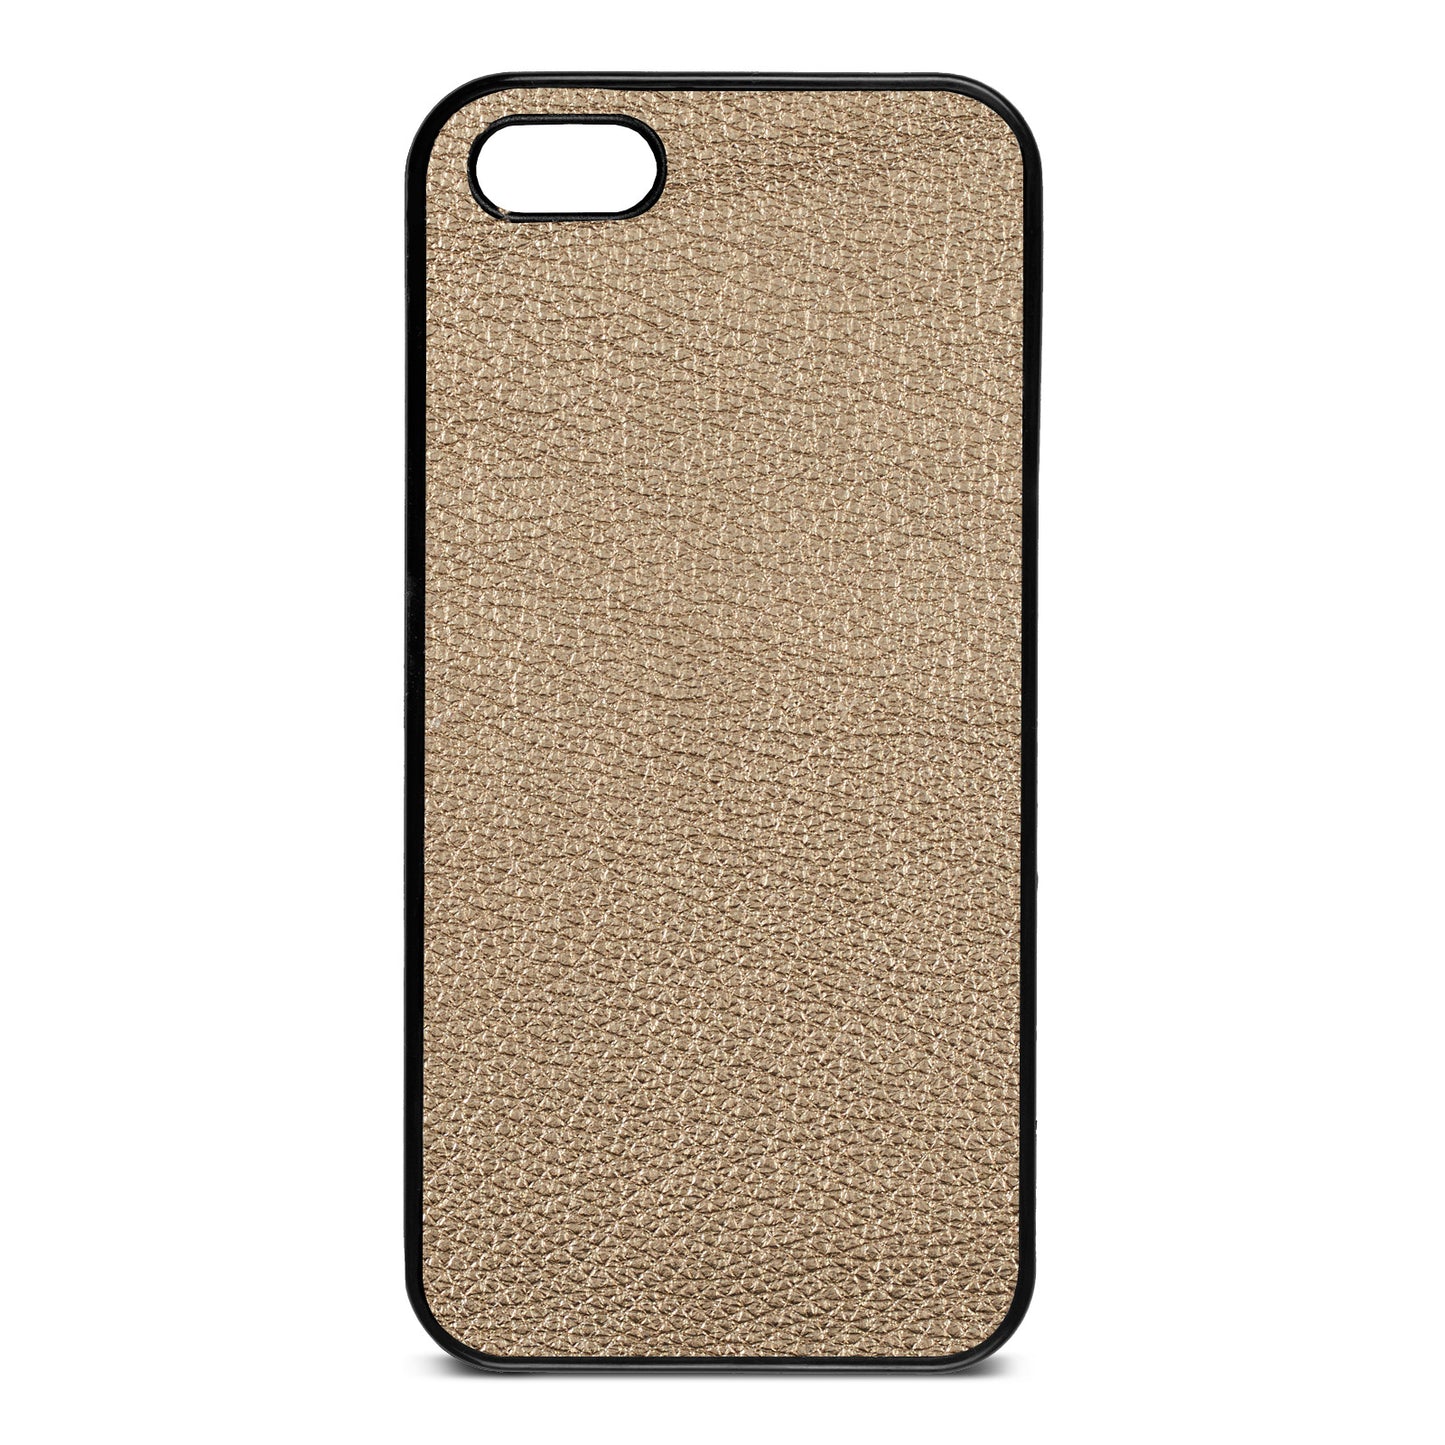 Blank iPhone 5 Gold Pebble Leather iPhone Case